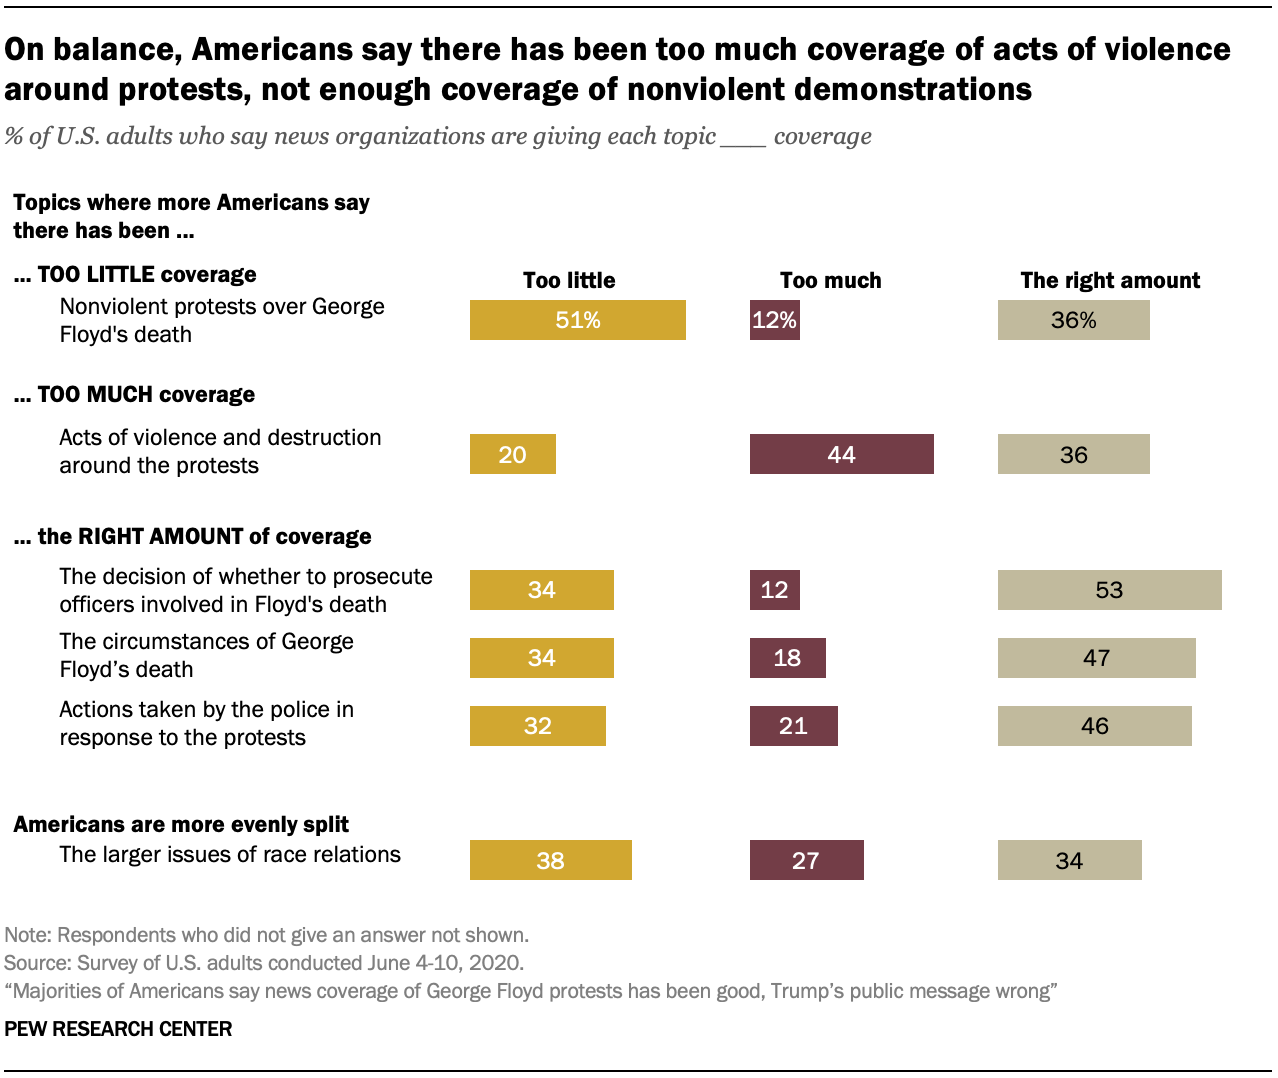 On balance, Americans say there has been too much coverage of acts of violence around protests, not enough coverage of nonviolent demonstrations